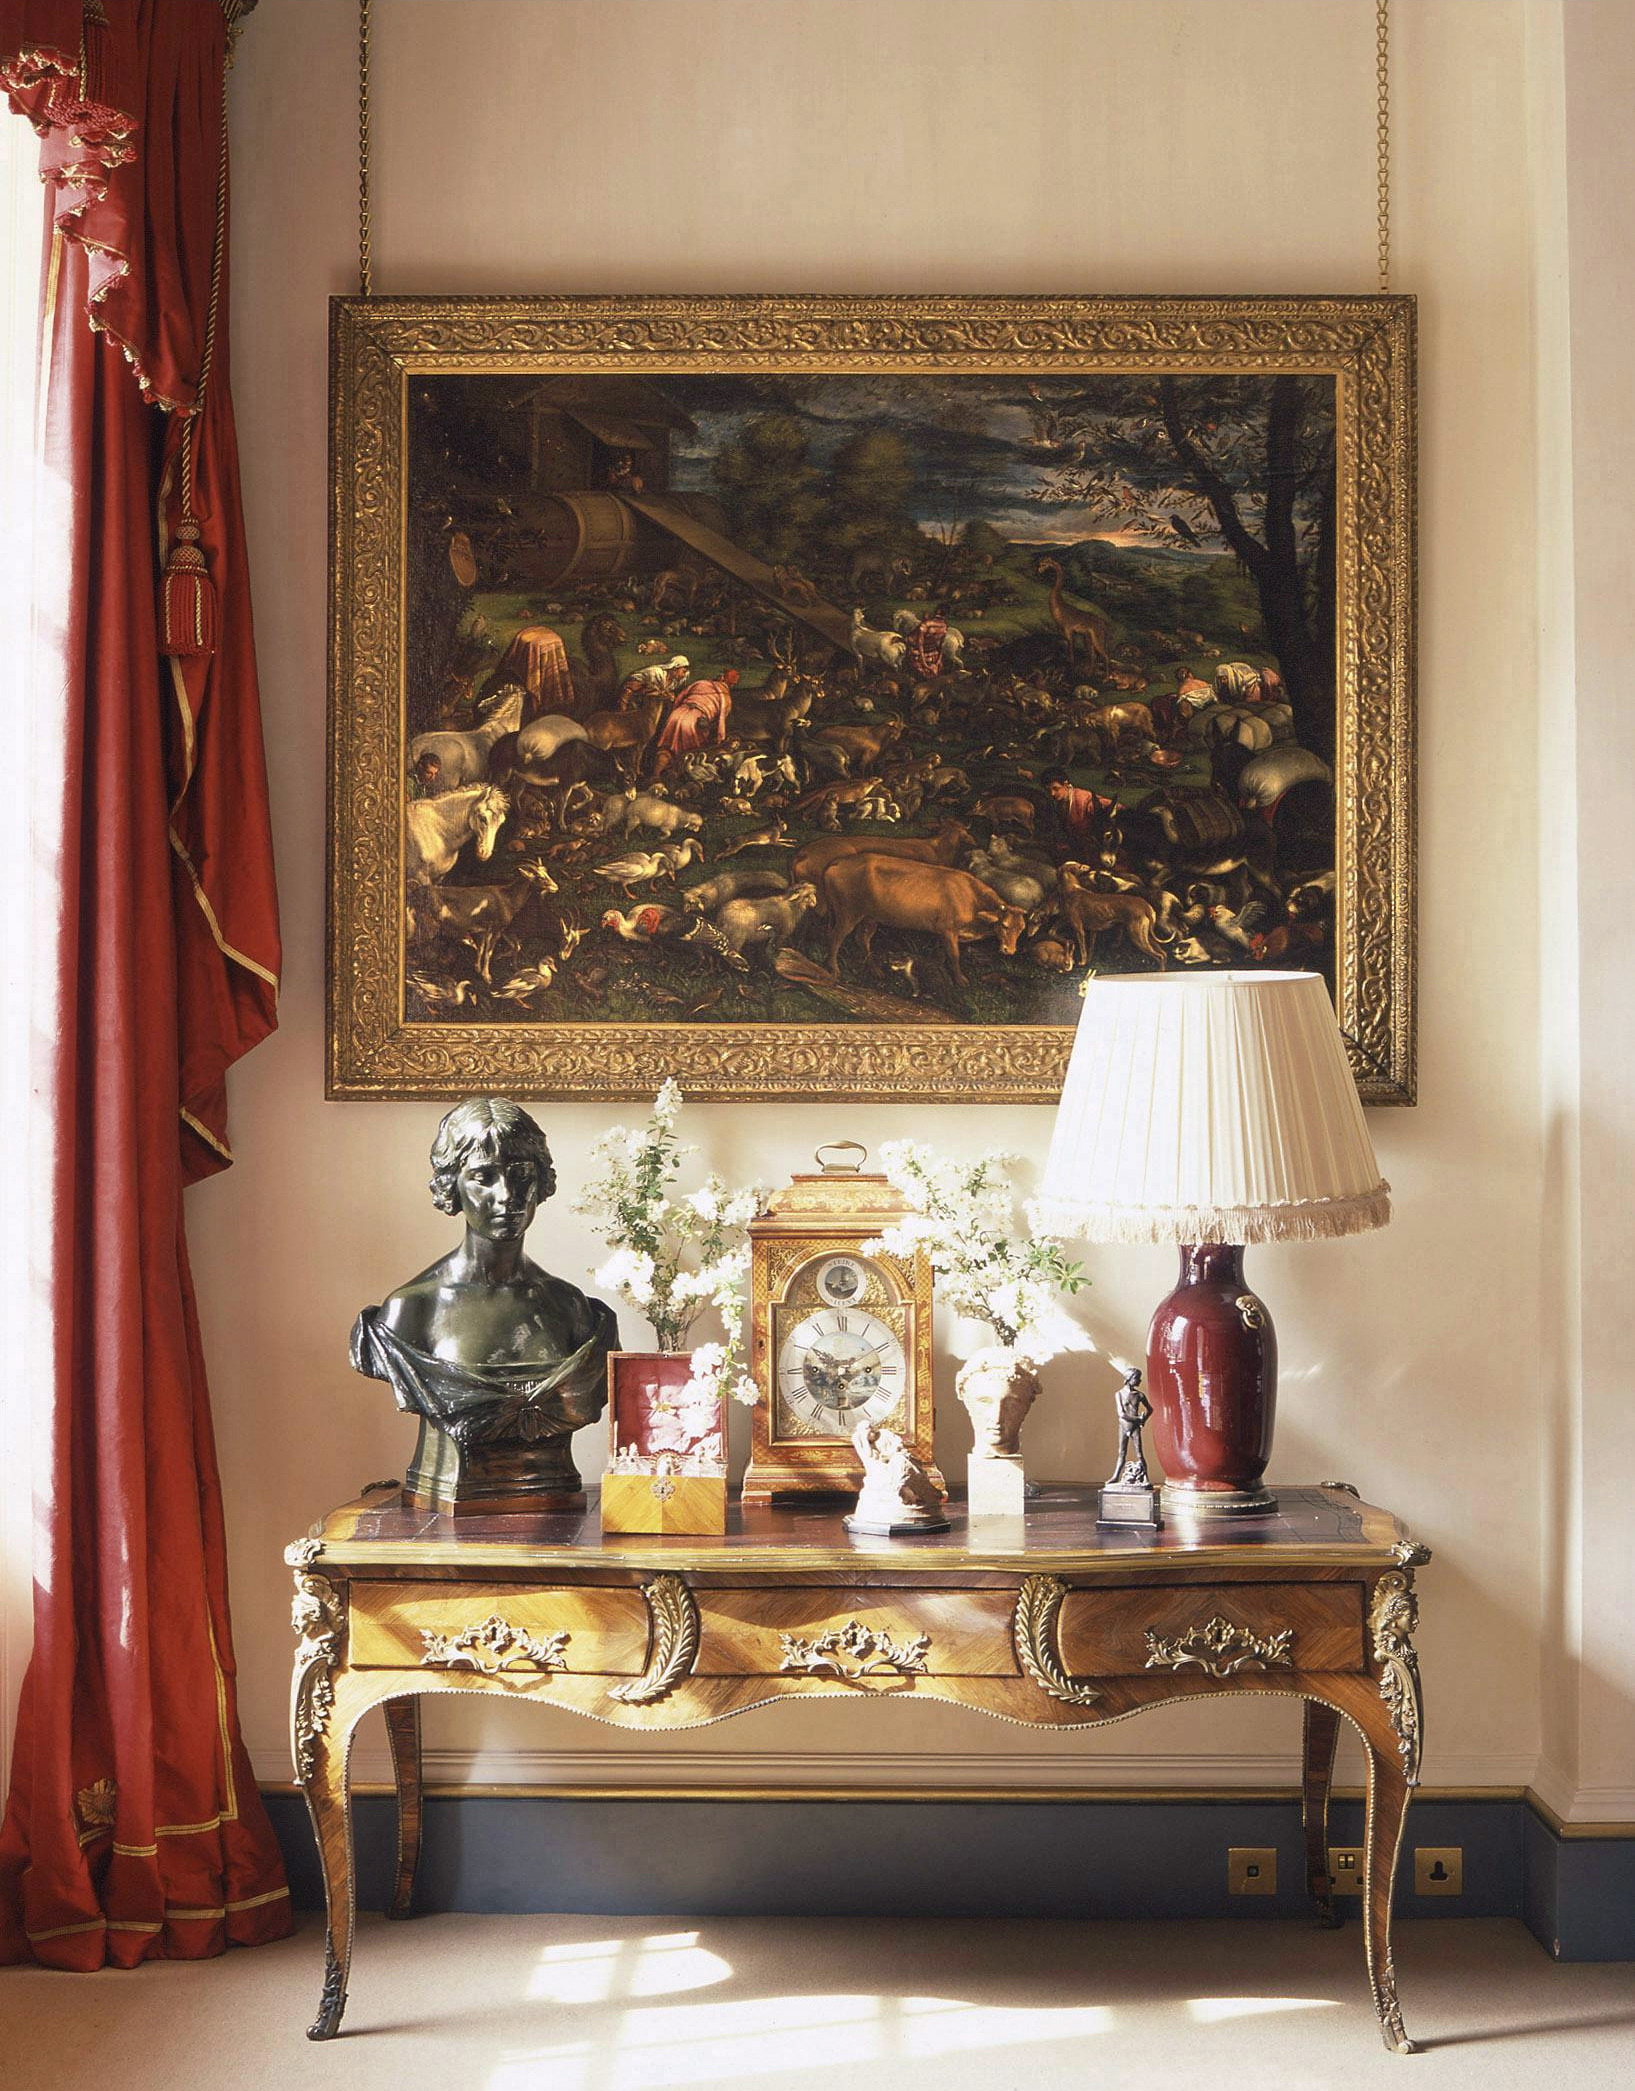 The Garden Room at Clarence House, with Leandro Bassano's painting of Noah's Ark and a bust of Queen Elizabeth The Queen Mother by Arthur Walker. Photo: Tim Graham Picture Library/Getty Images.